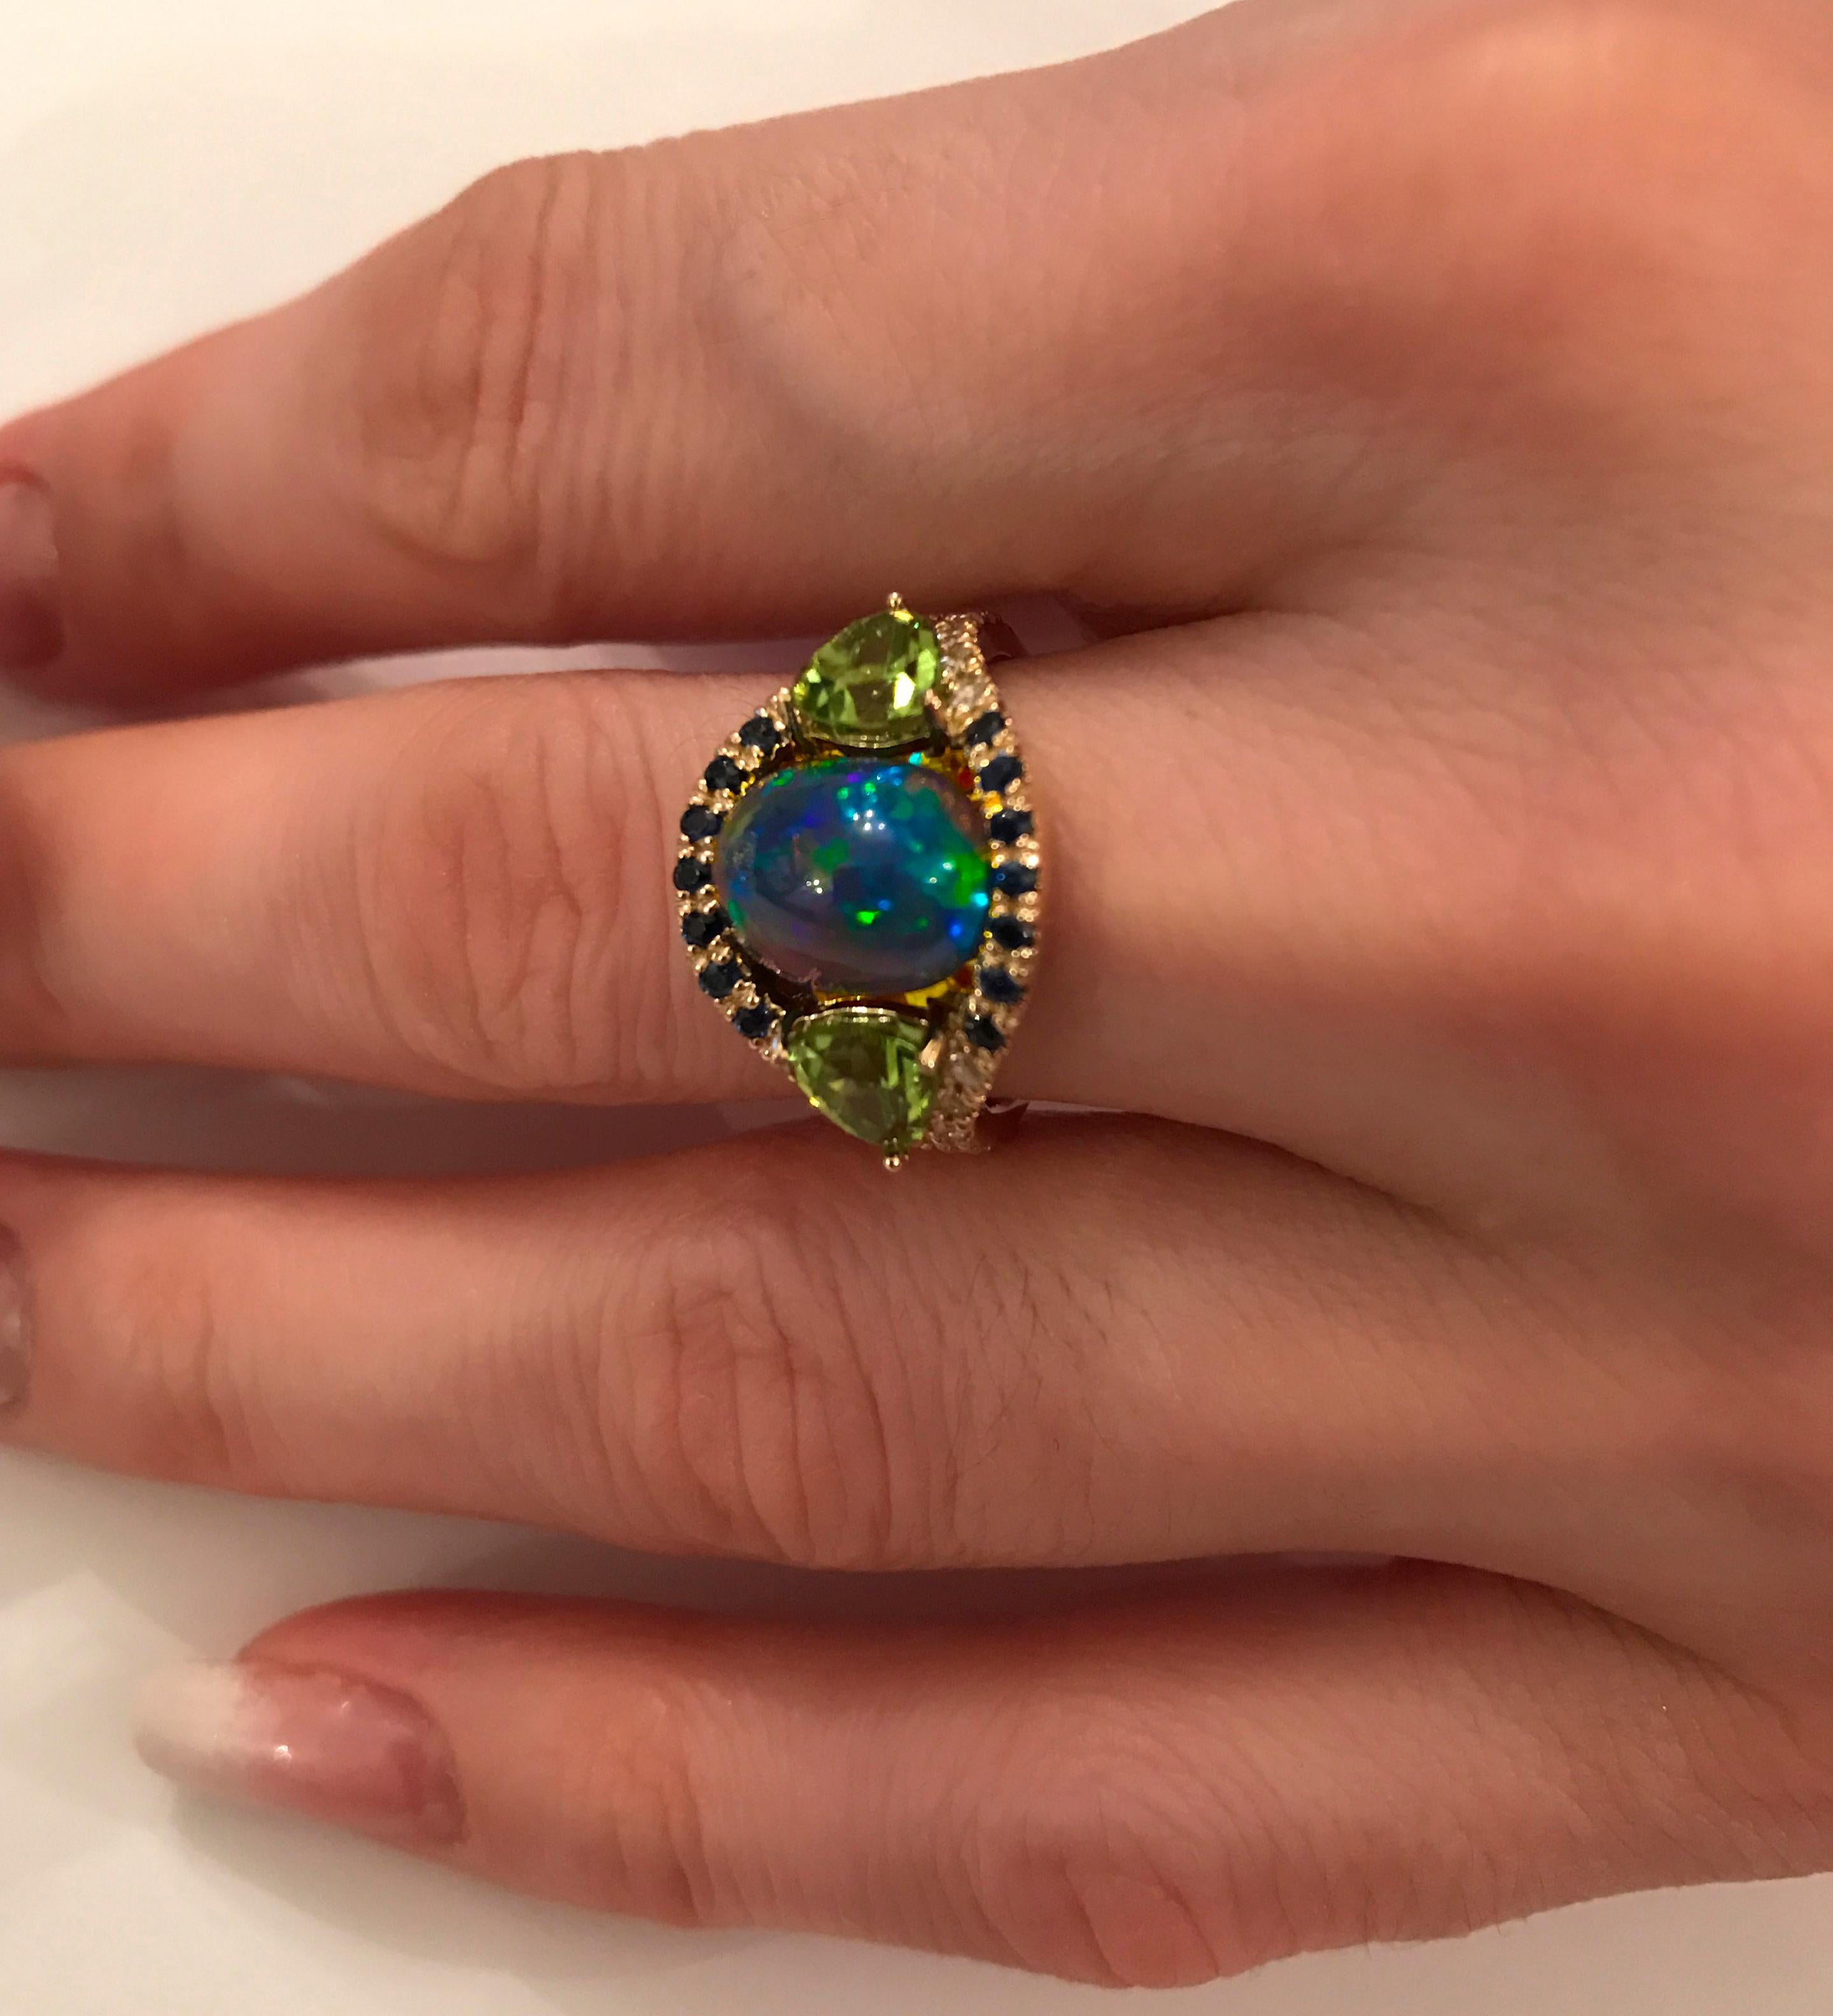 For Sale:  Black Opal, Sapphires, Peridots, Diamonds 14k Gold Ring, Genuine Opal Ring 9